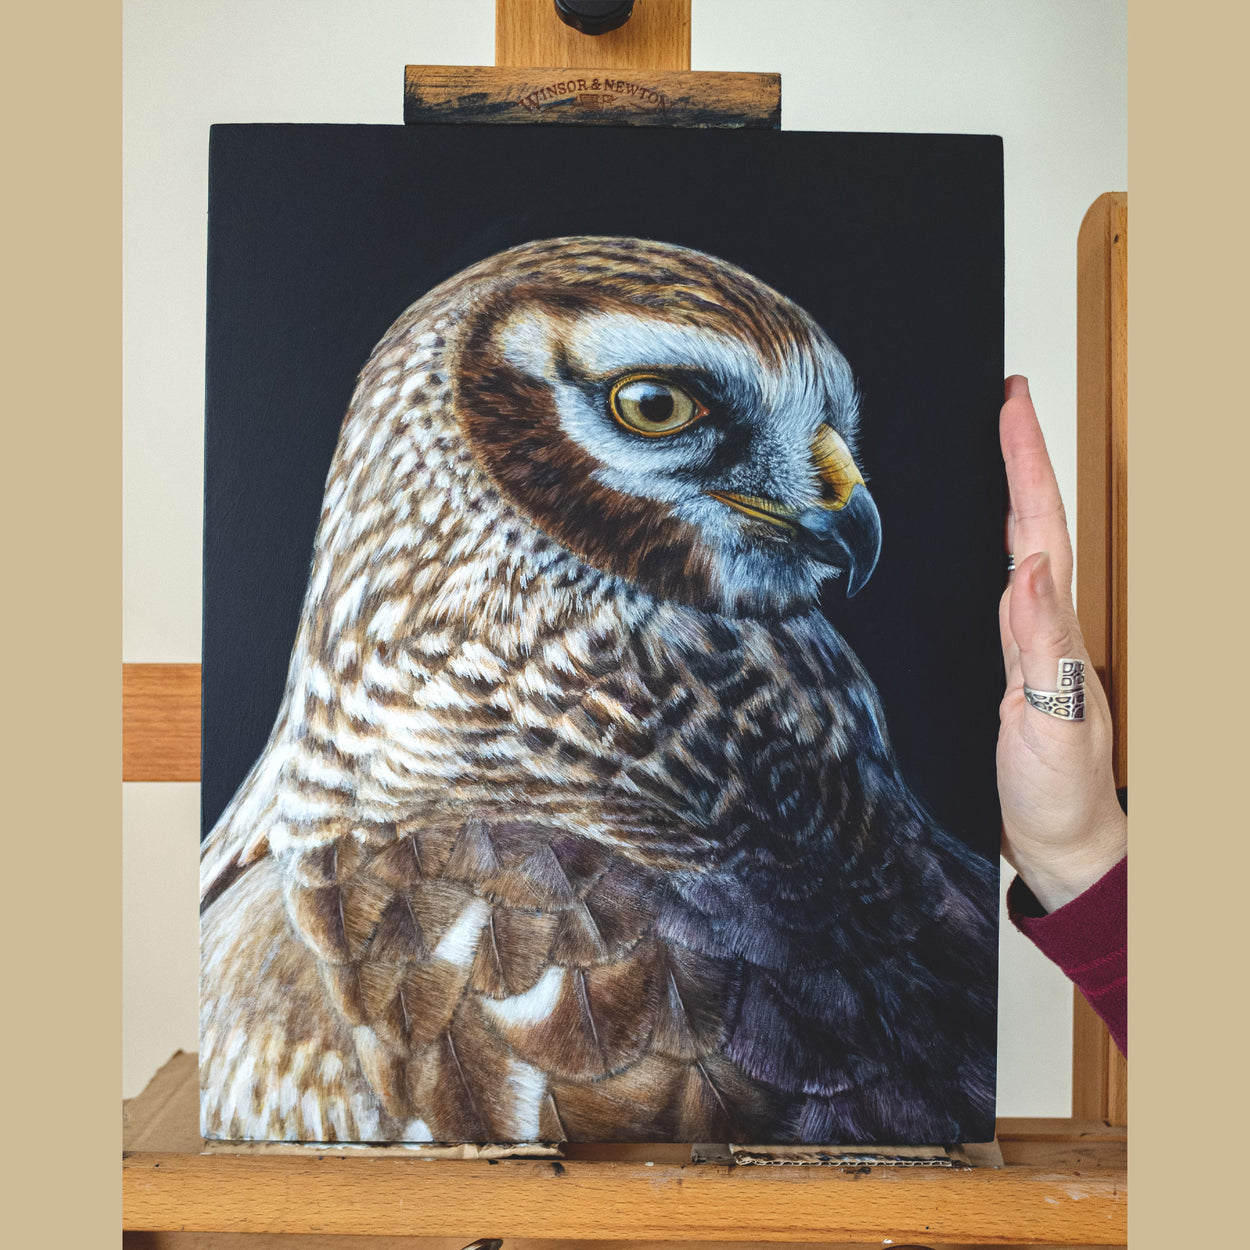 Painting of a hen harrier portrait on an easel with a hand next to it